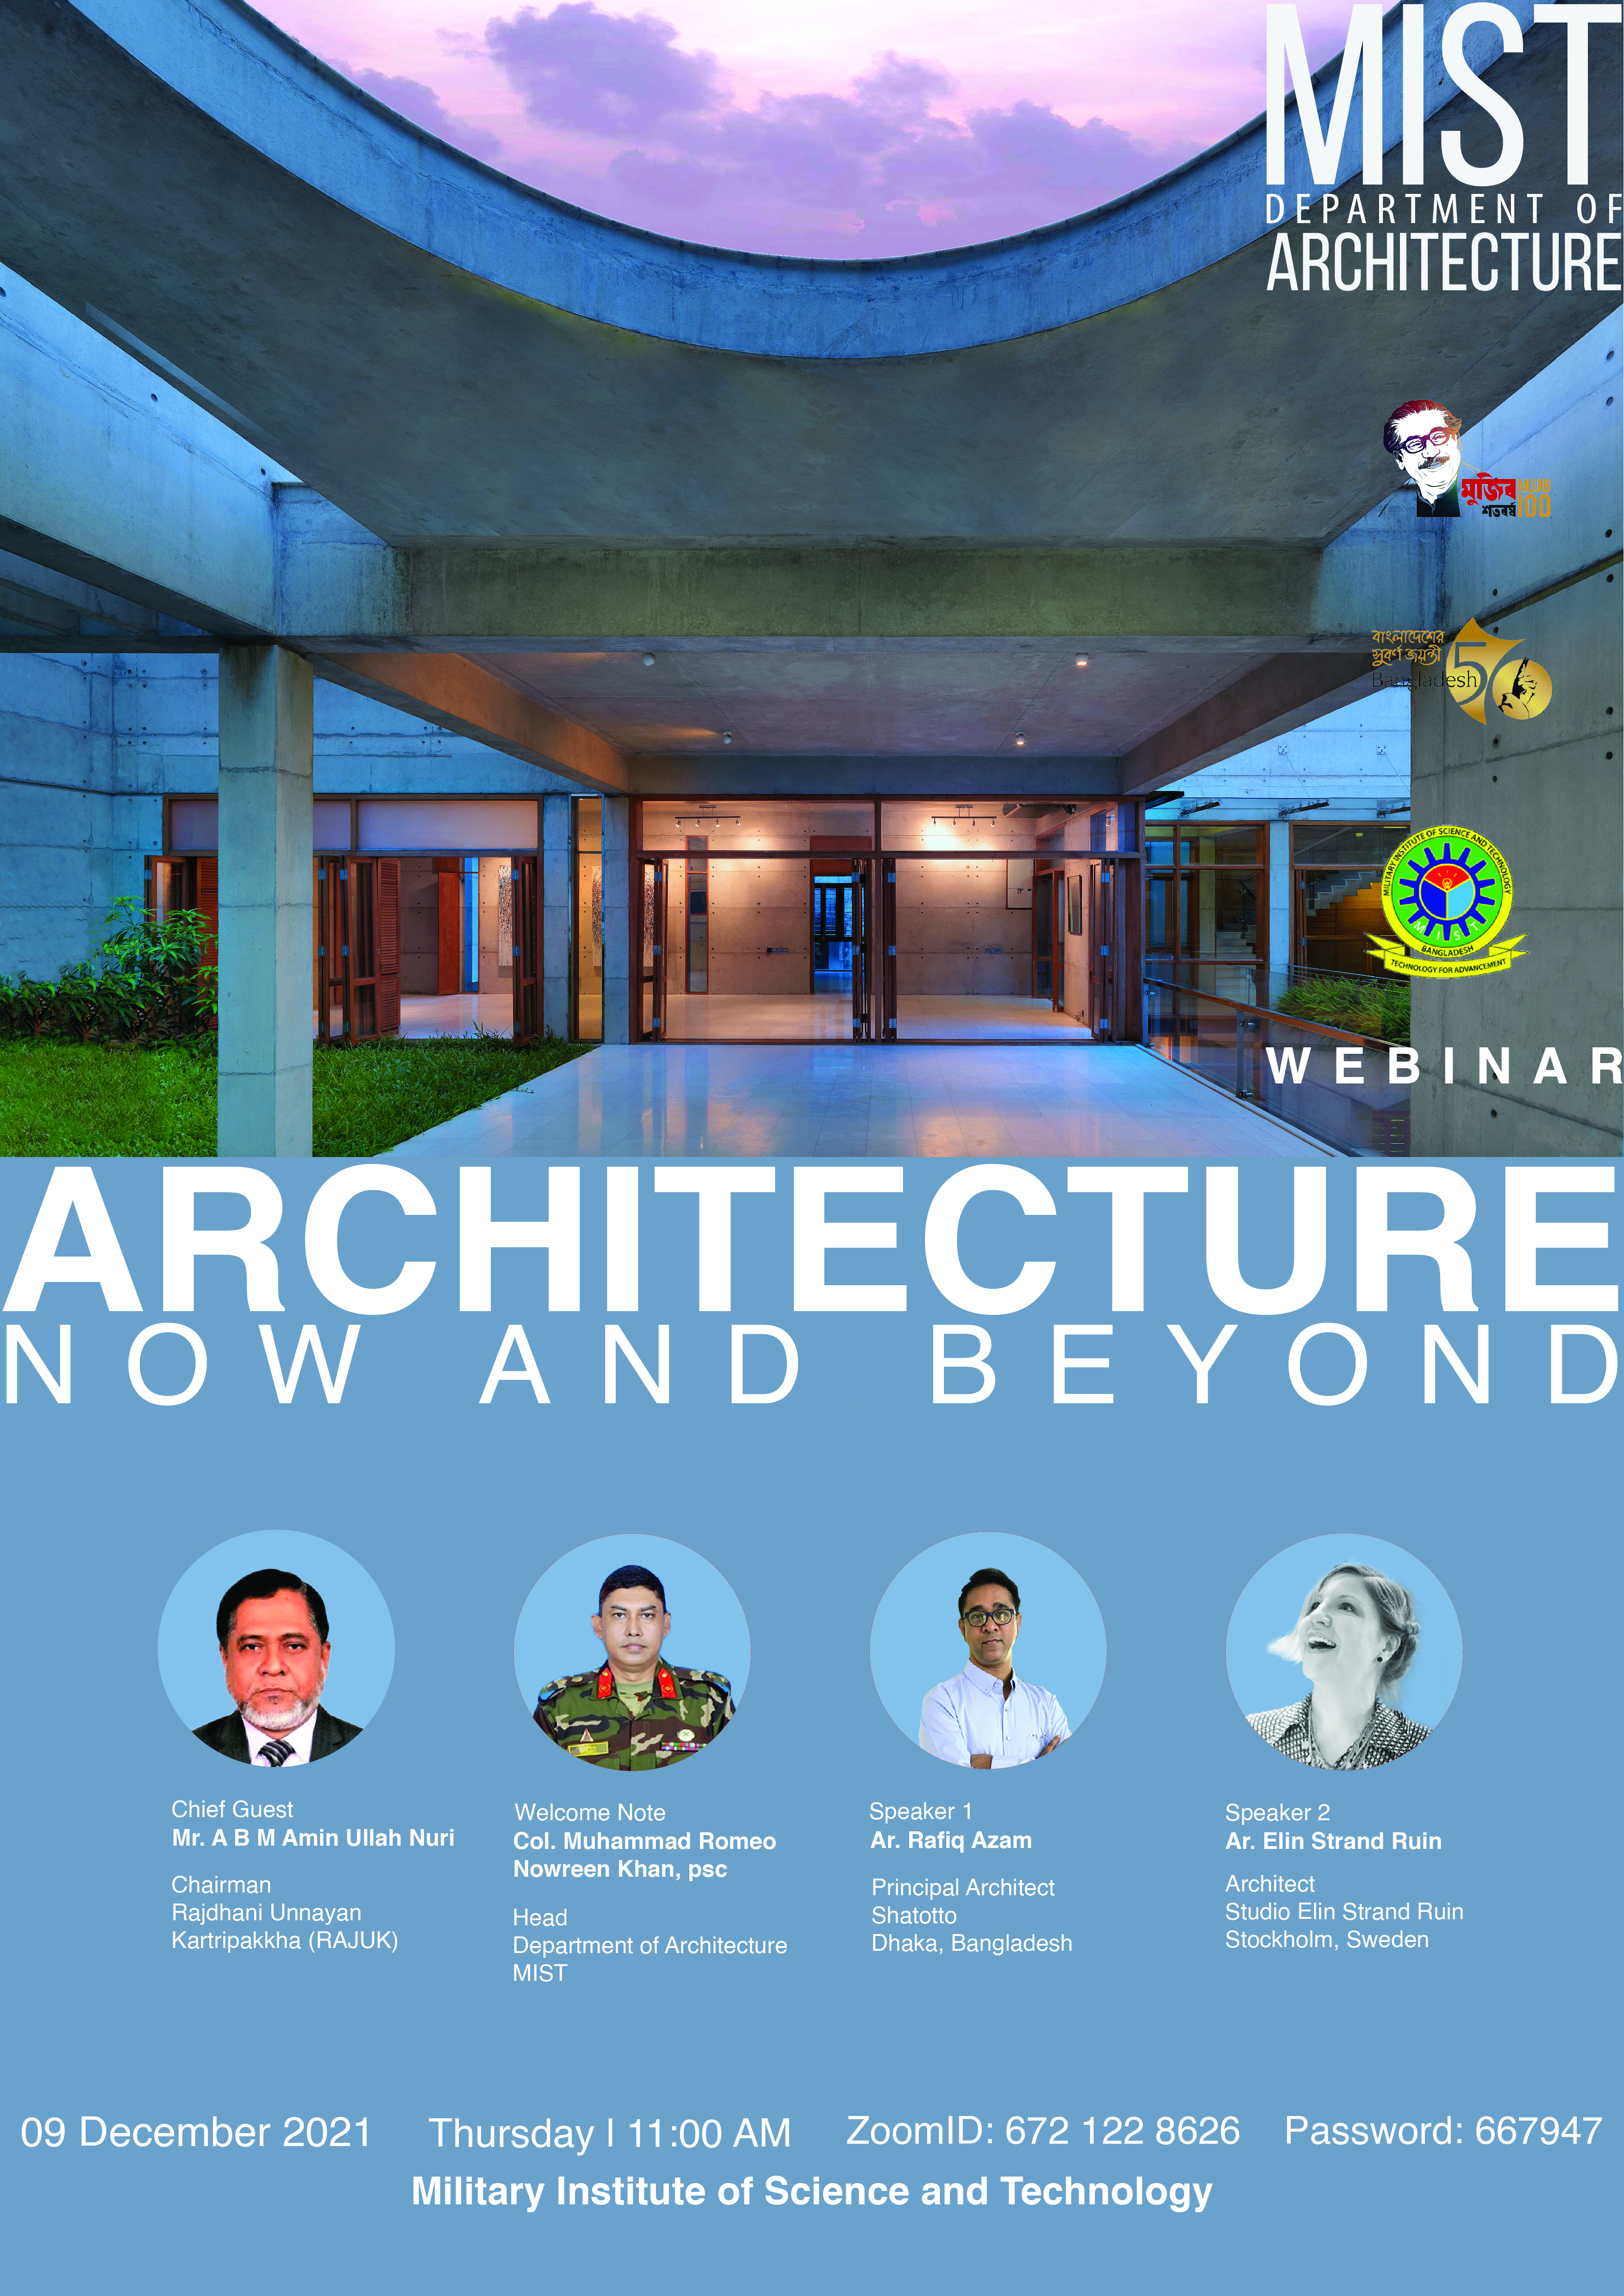 WEBINAR ON 'ARCHITECTURE NOW AND BEYOND' ORGANIZED BY THE ARCHITECTURE DEPARTMENT OF MIST.